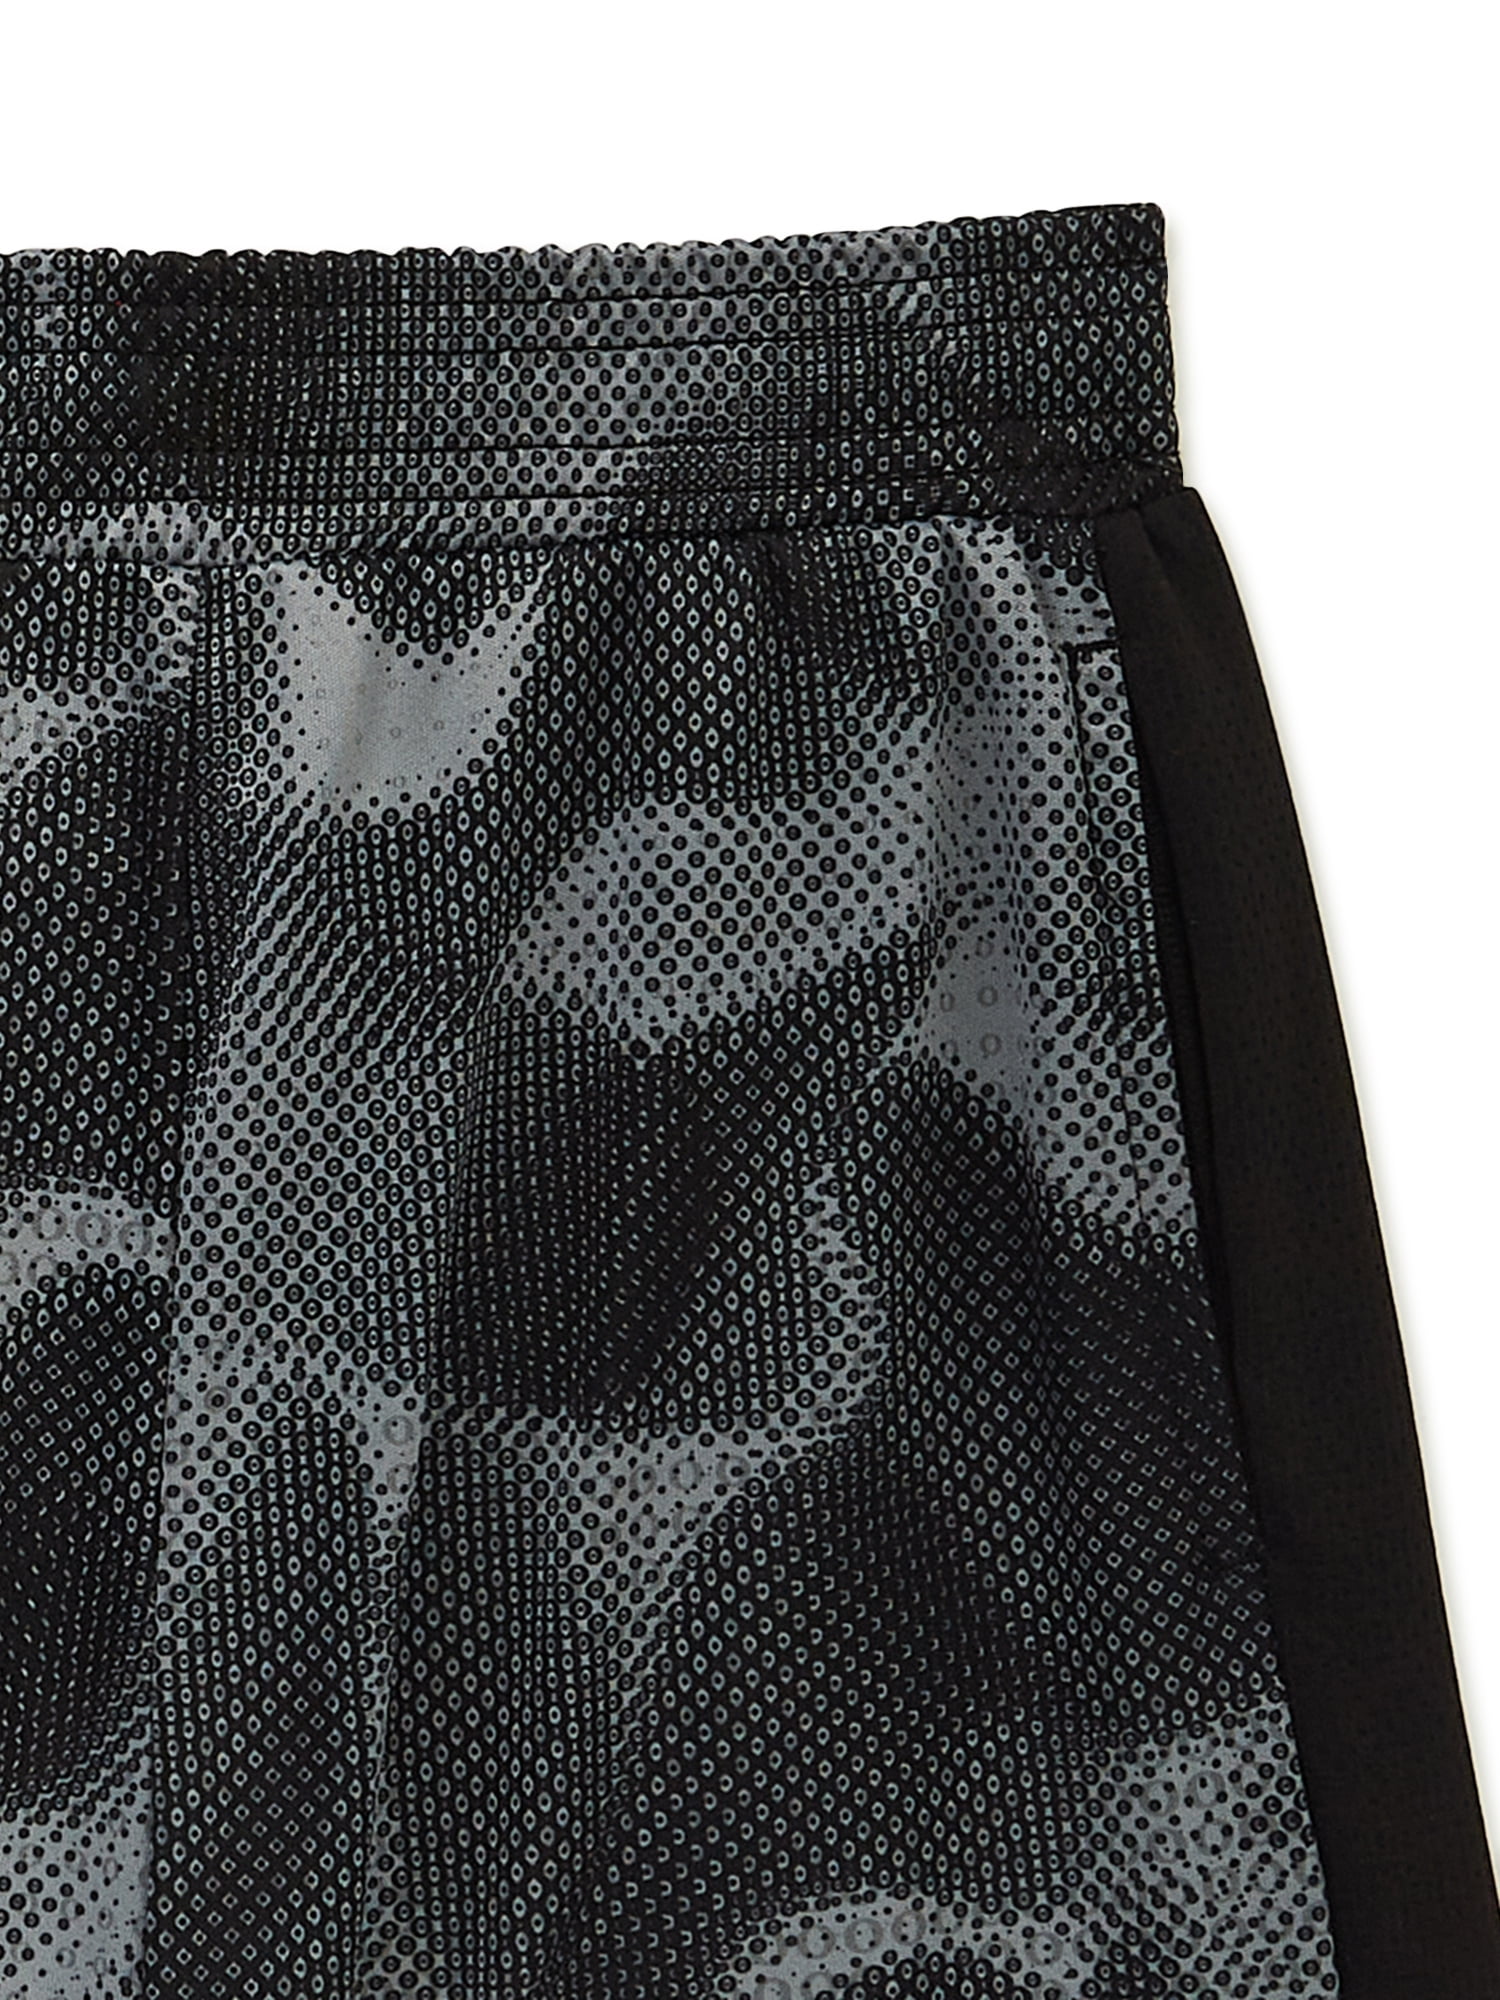 Cheetah Boys Woven Shorts with Compression Liners, 2-Pack, Sizes 4-18 & Husky, Boy's, Size: 10-12 Husky, Black